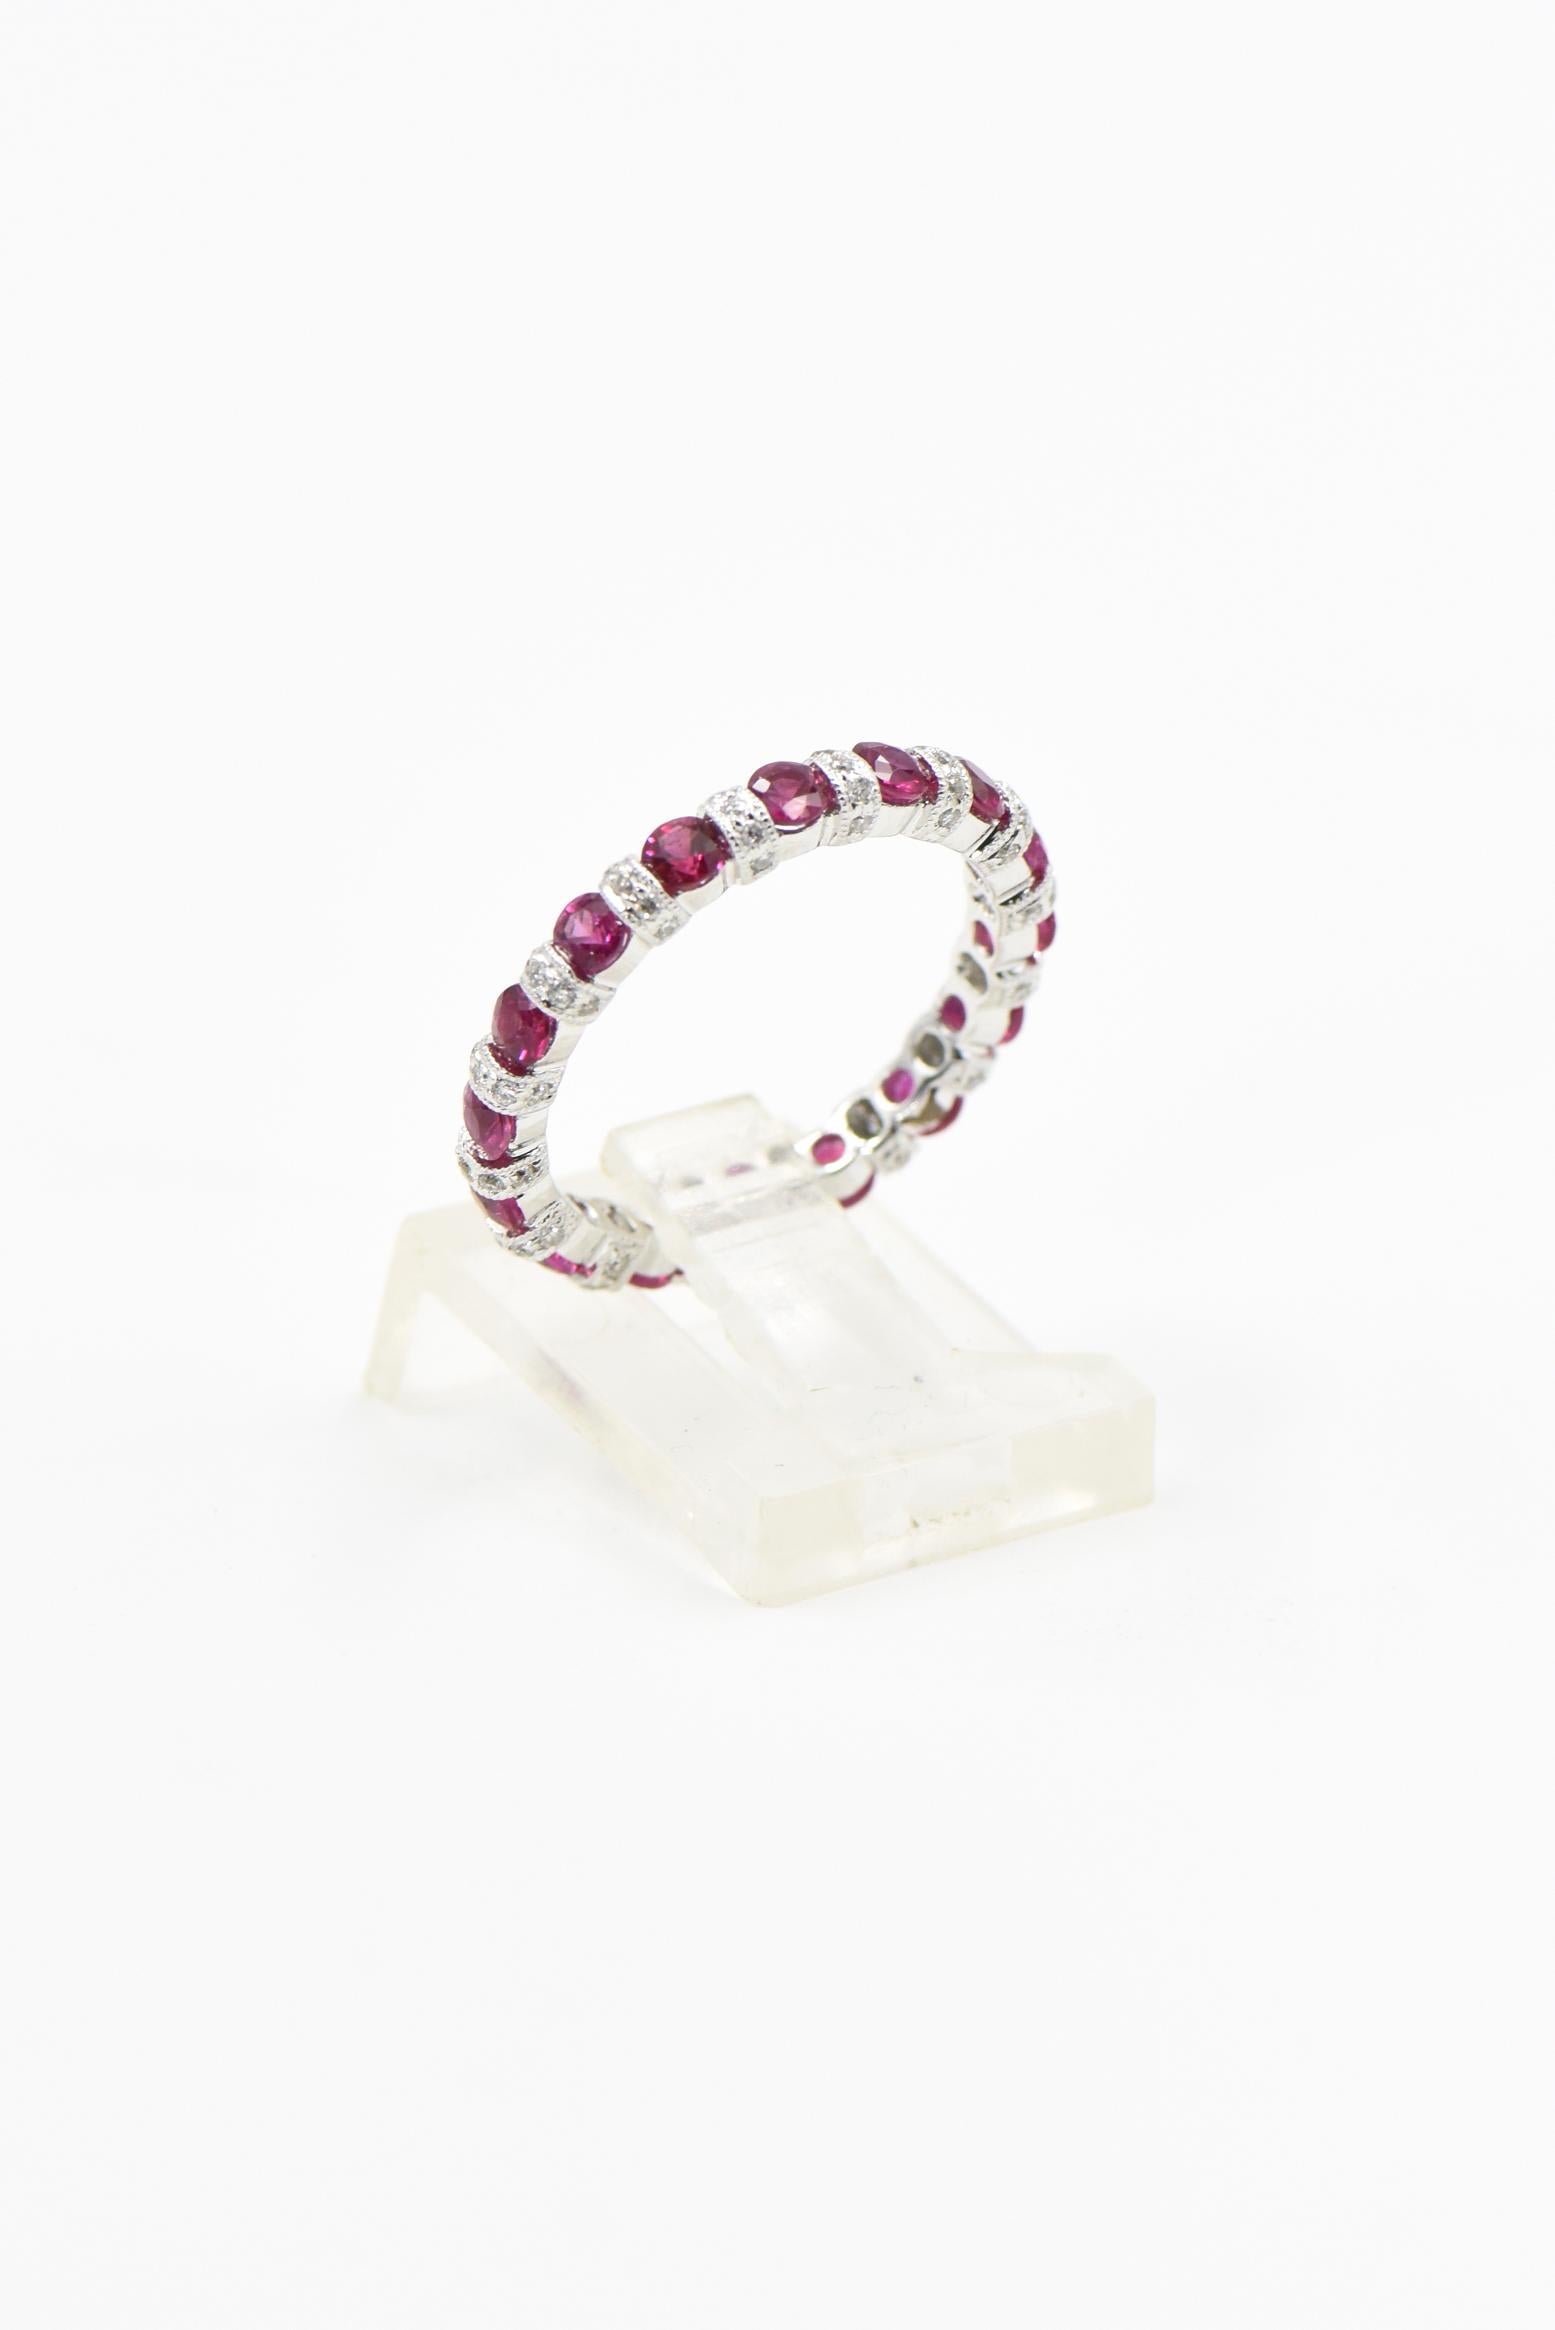 Beautifully made ruby eternity band with diamond spacer bars set between the rubies.  Each spacer bar has 5 small diamonds.
The band is 2.73 mm wide at the rubies and 2.97 mm at the diamond bars.  The band is made of 18k white gold.
US size 6.5 